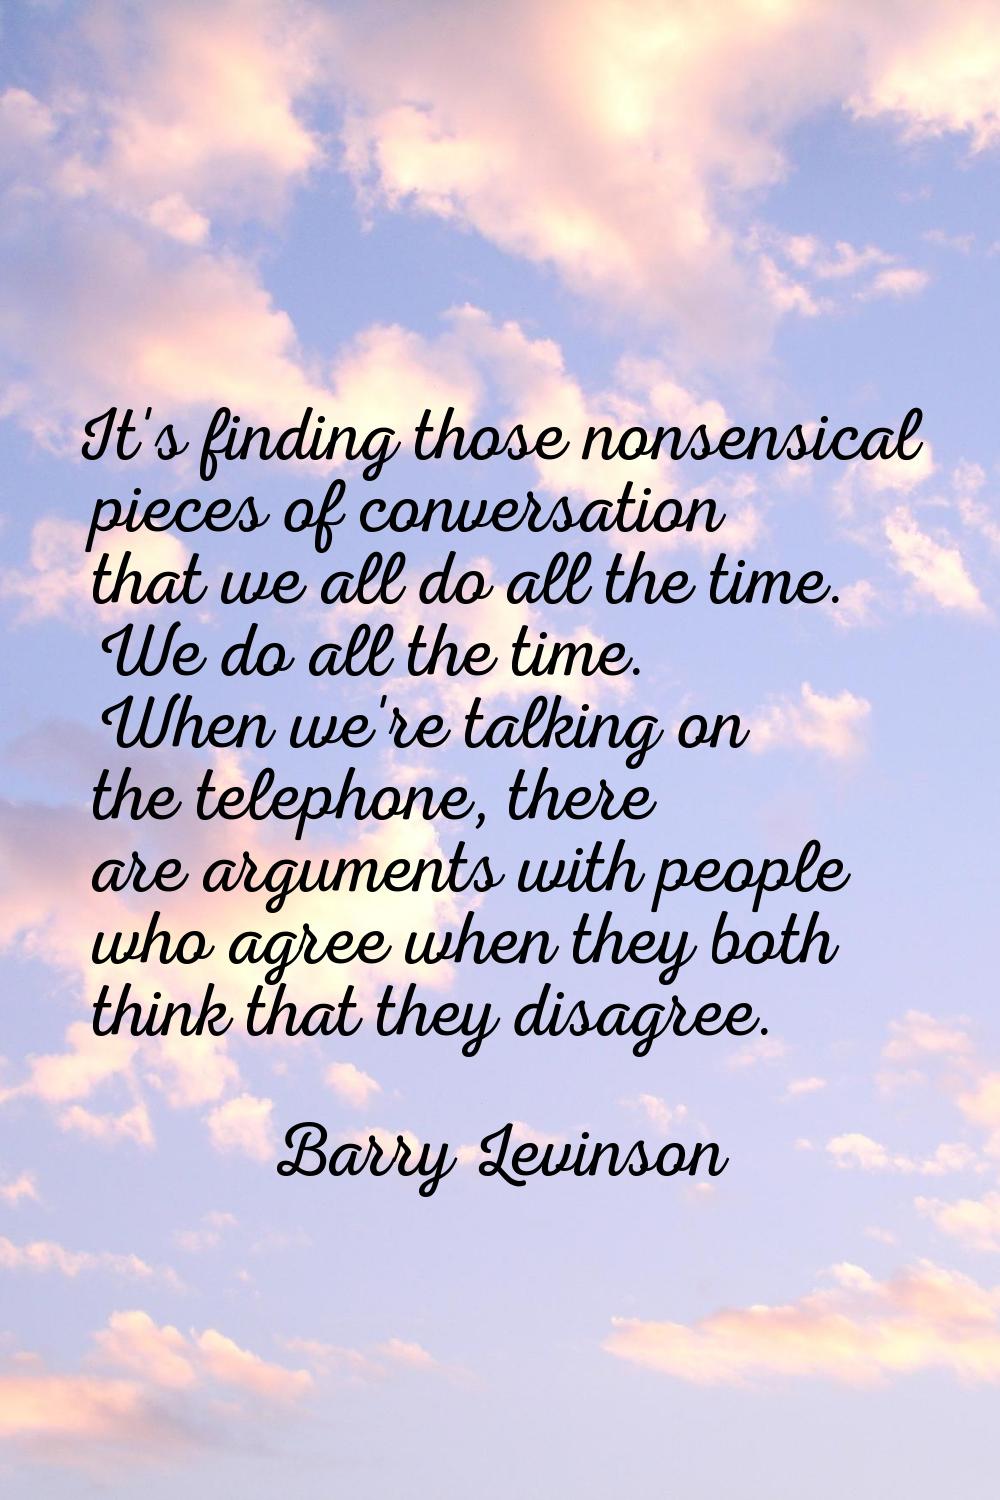 It's finding those nonsensical pieces of conversation that we all do all the time. We do all the ti